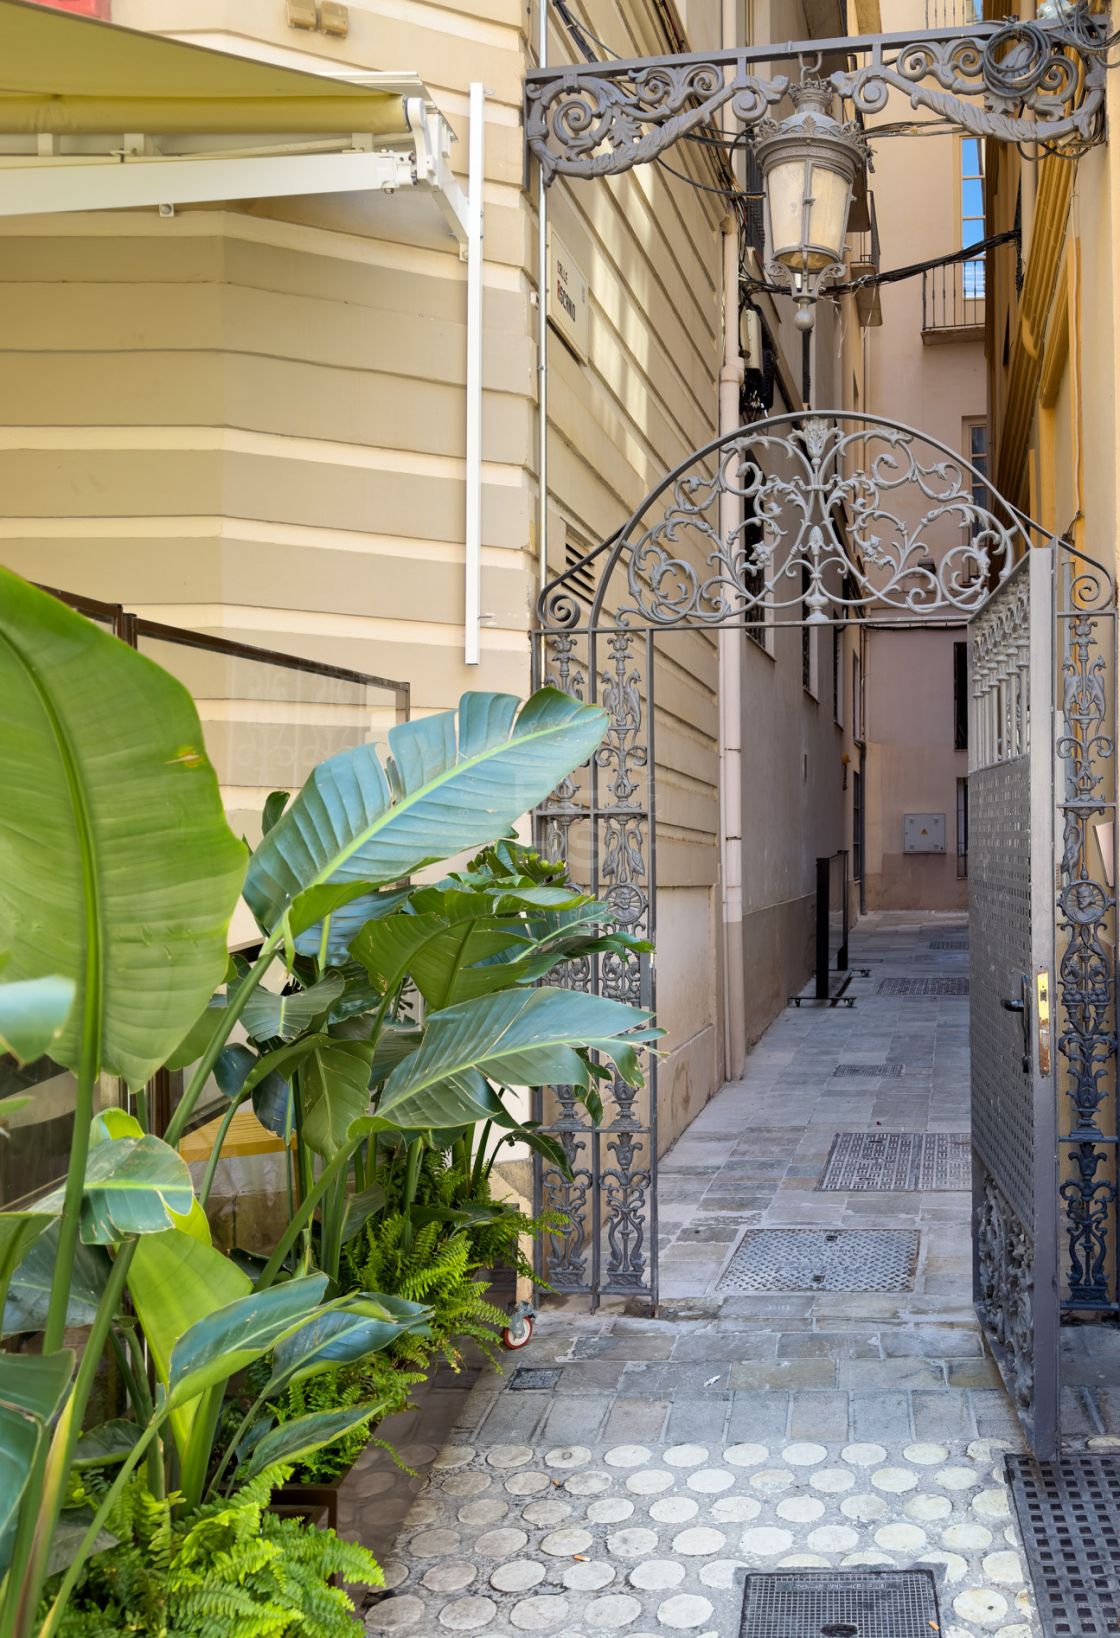 Brand new modern 3-bedroom apartment in the heart of Malaga’s Historic Centre